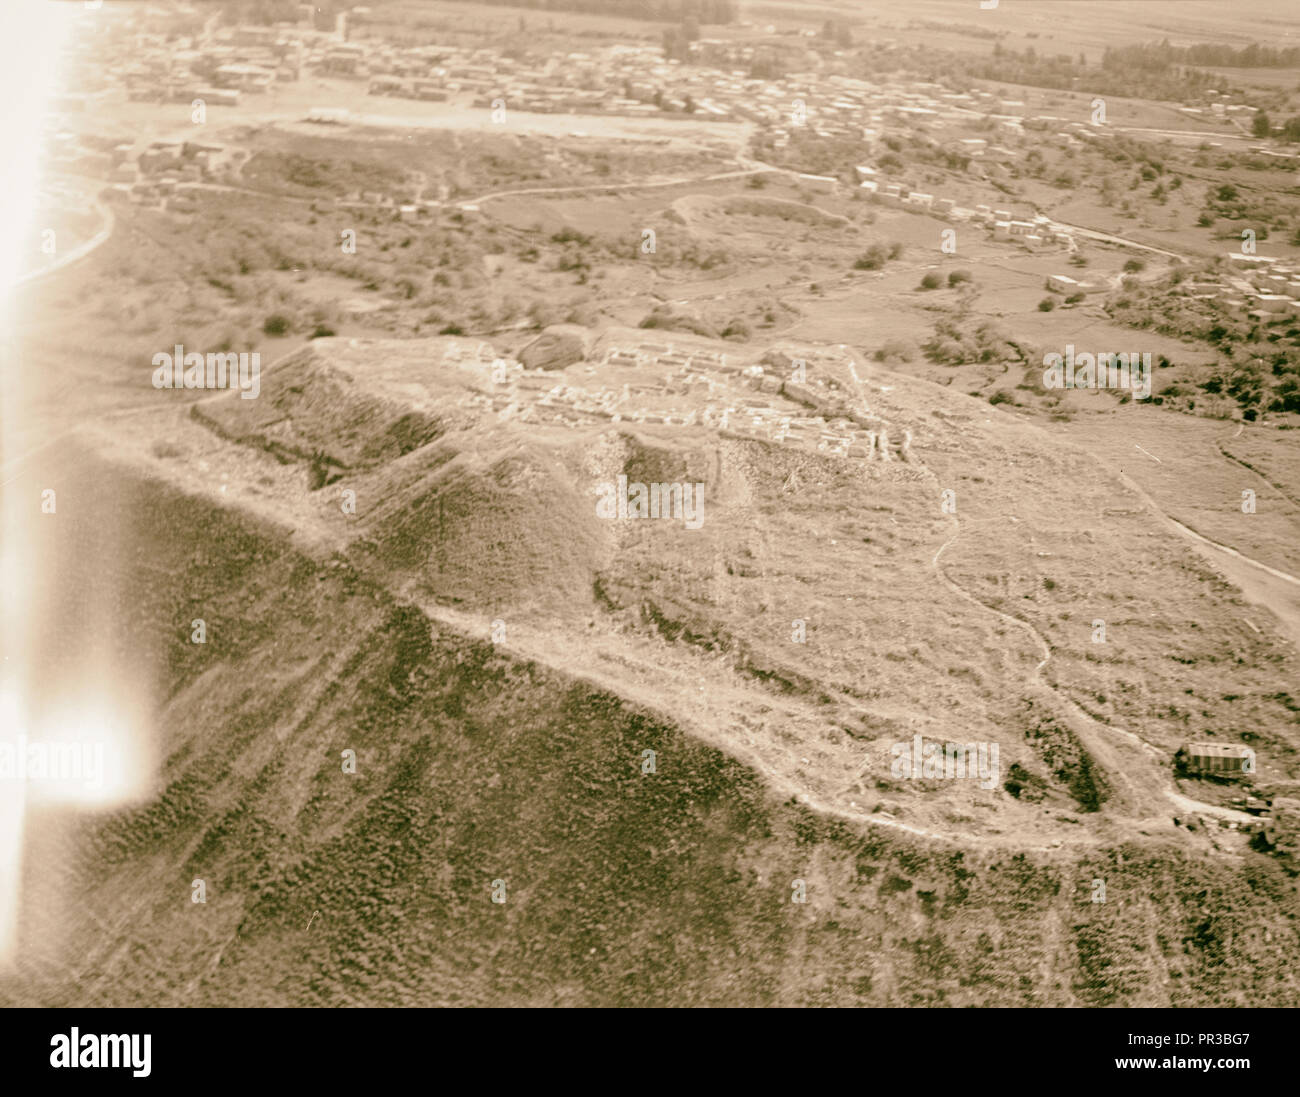 Air films (1937). Beisan mound. 1937, Israel, Bet Sheʾan Stock Photo